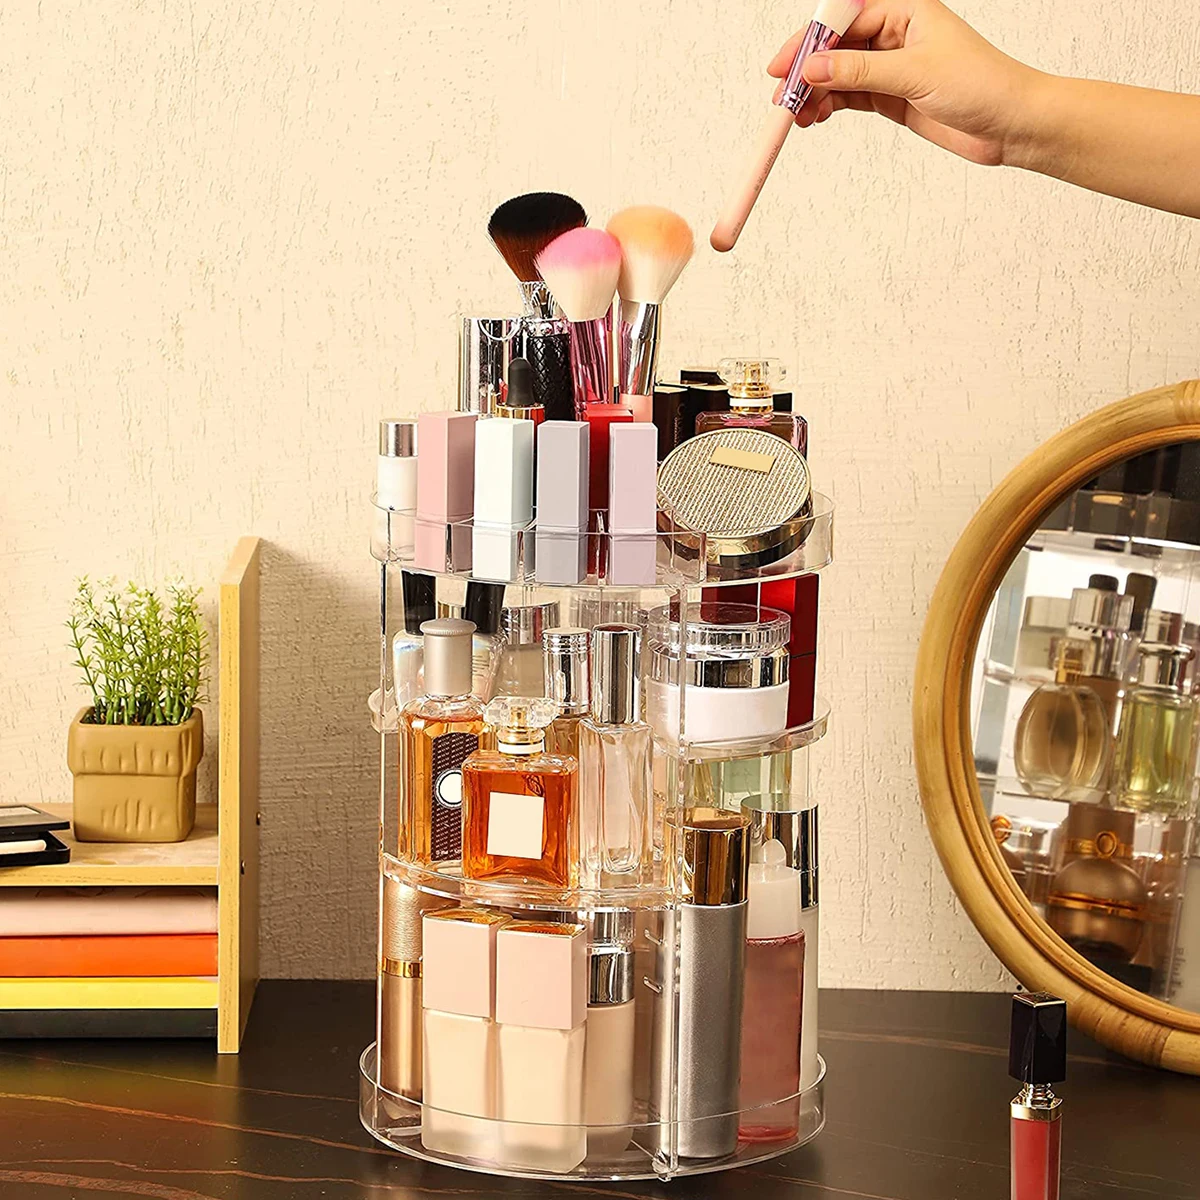 

Rotating Makeup Organizer 360° Spinning Make Up Stand 4 Layers Clear Adjustable Cosmetic Storage Display Box DIY Spinning Large